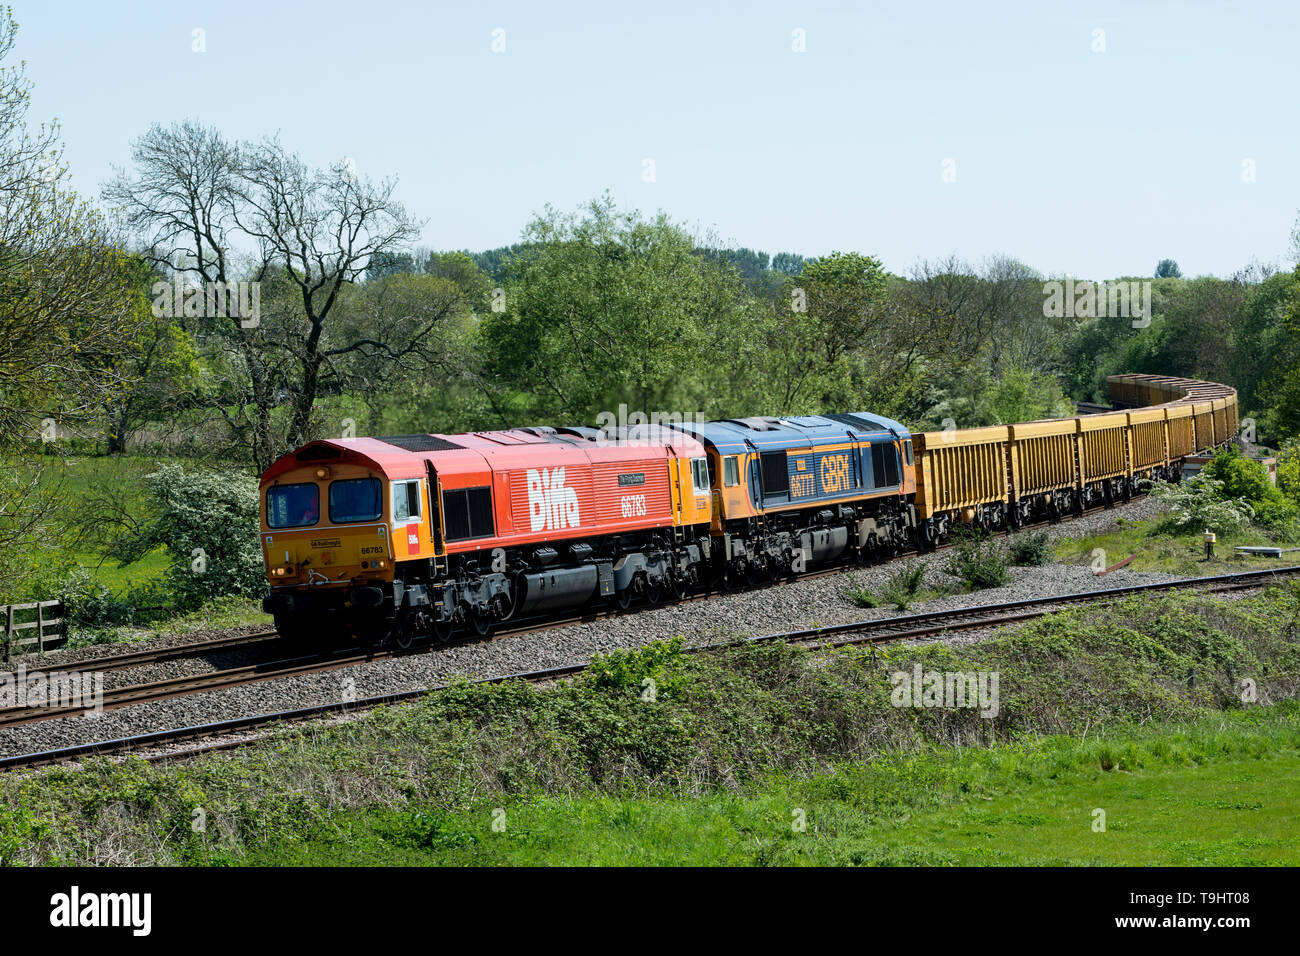 Two GBRf class 66 diesel locomotives pulling a freight train, Warwickshire, UK Stock Photo